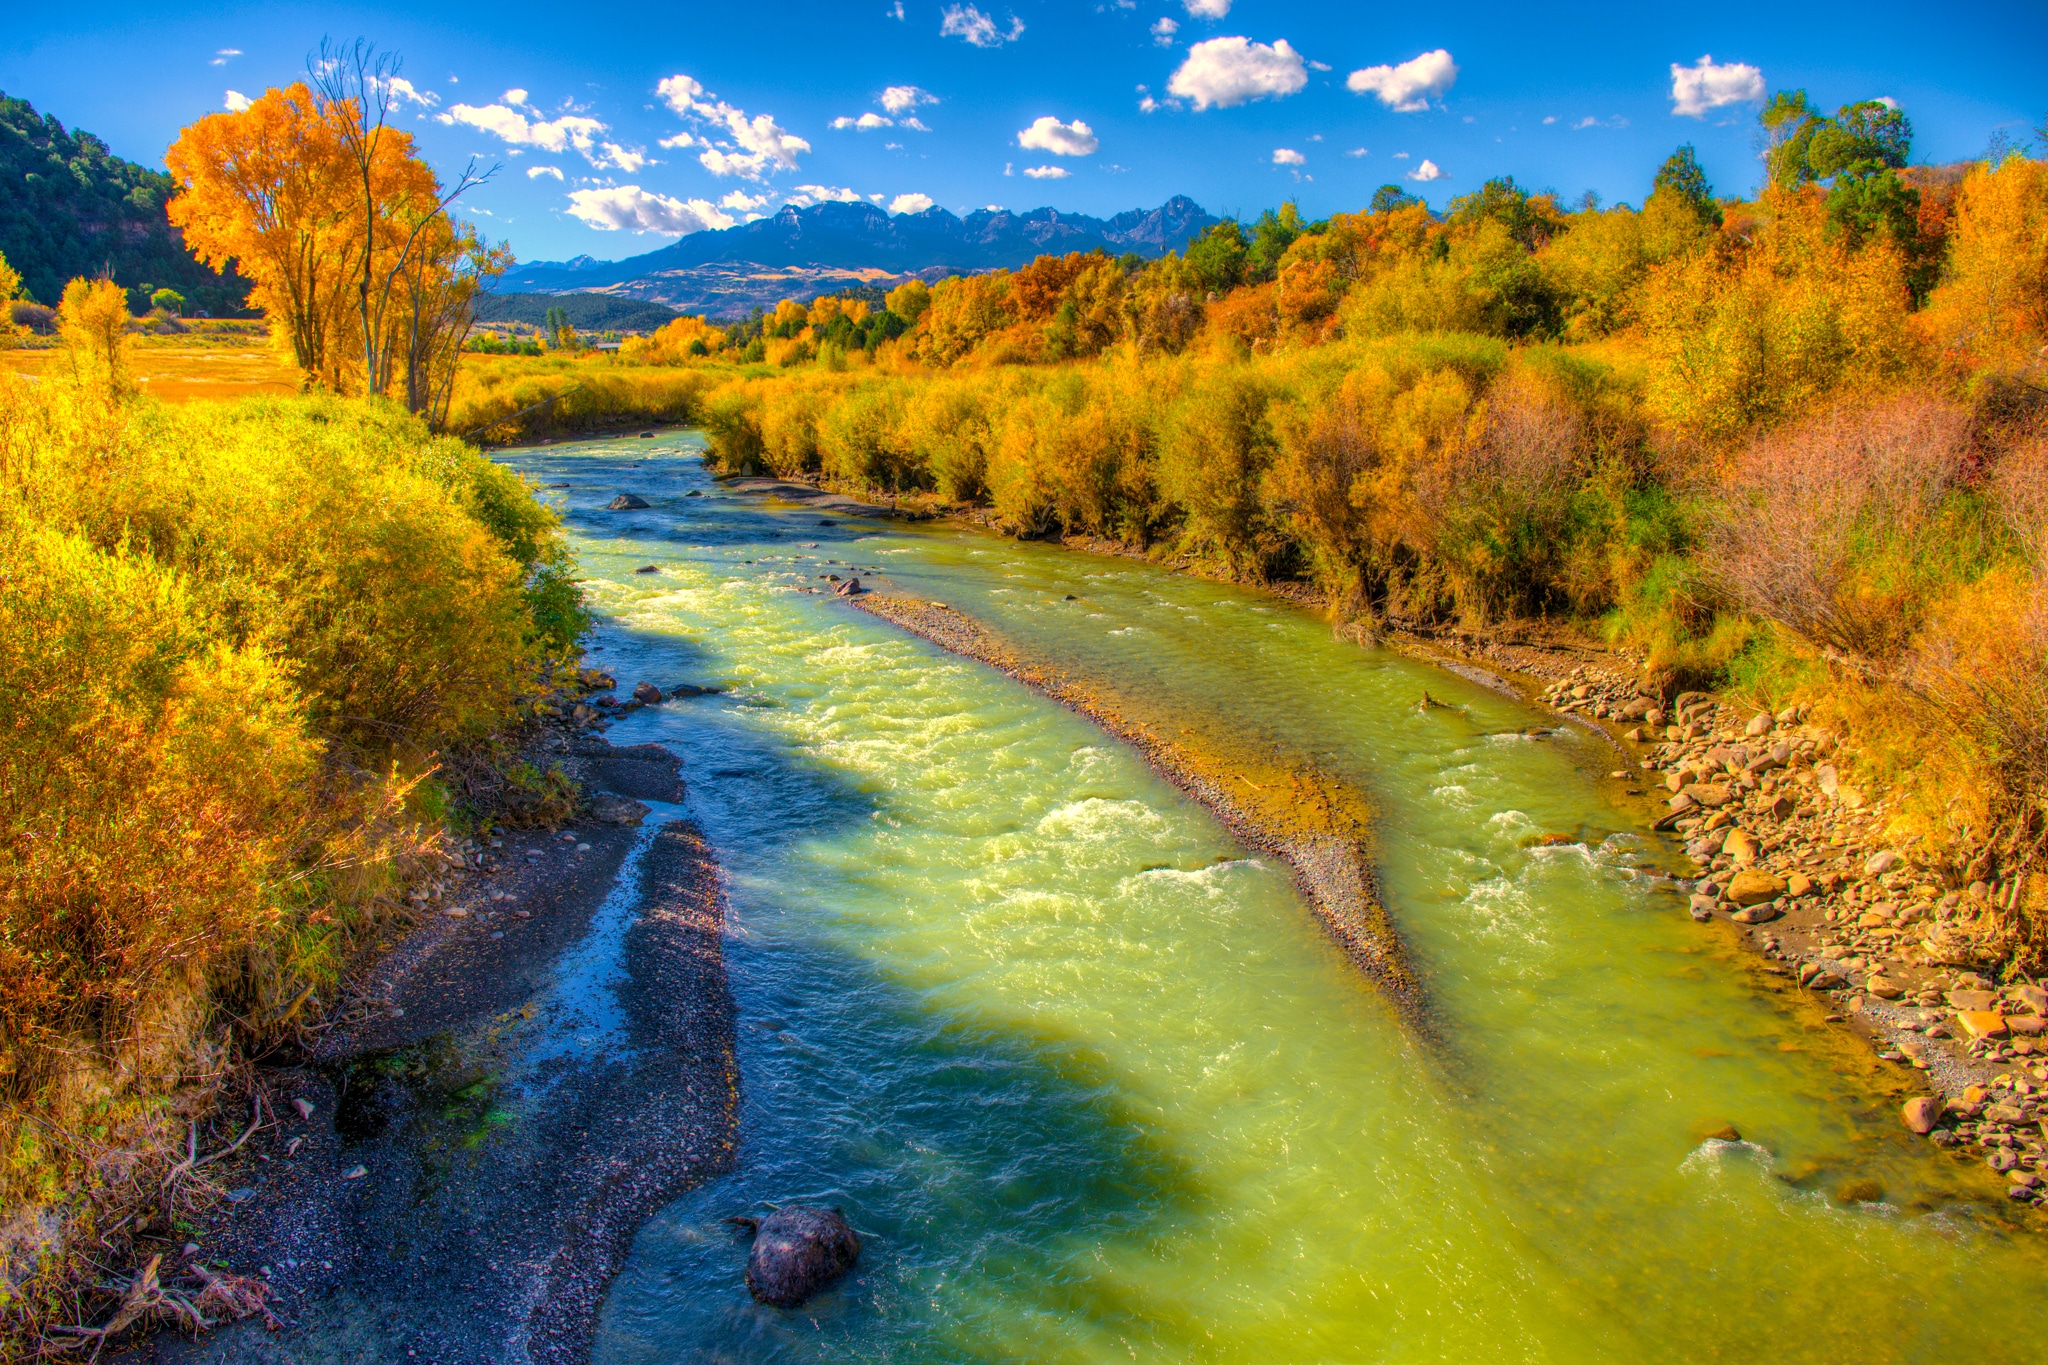 The Uncompahgre River is a beautiful green color as it heads from Ouray, Colorado, to join the Gunnison River near Delta, Colorado. Fall foliage lines the banks near Ridgway State Park on Highway 550.